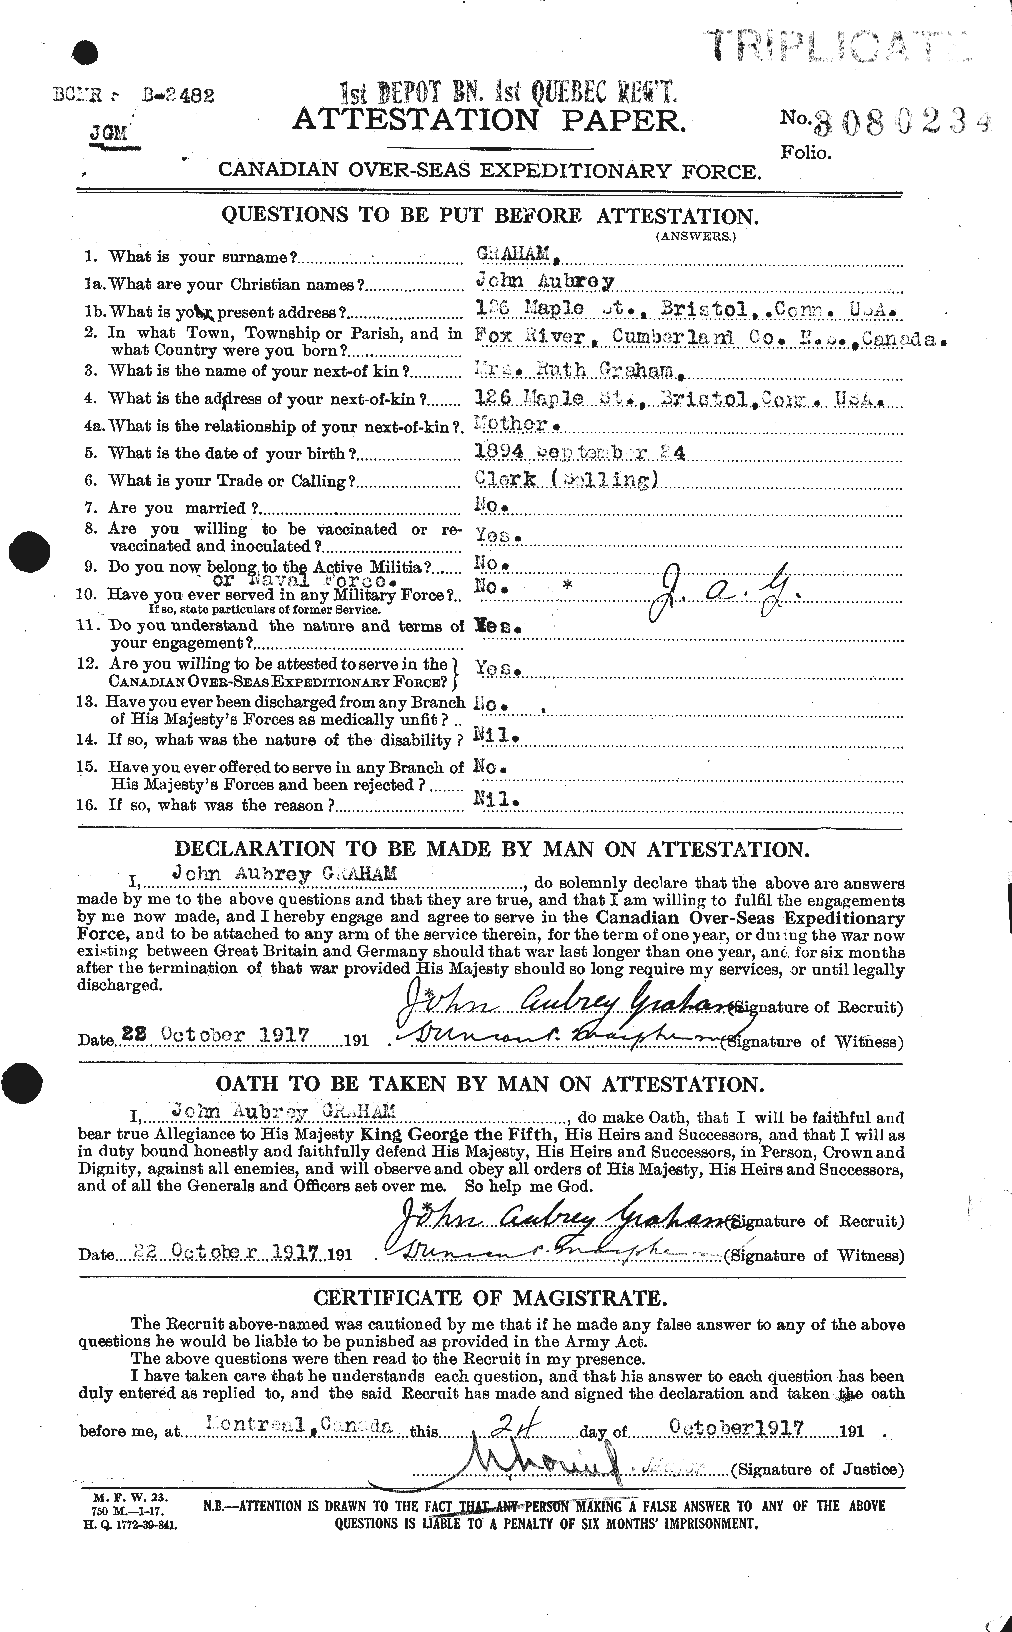 Personnel Records of the First World War - CEF 359156a